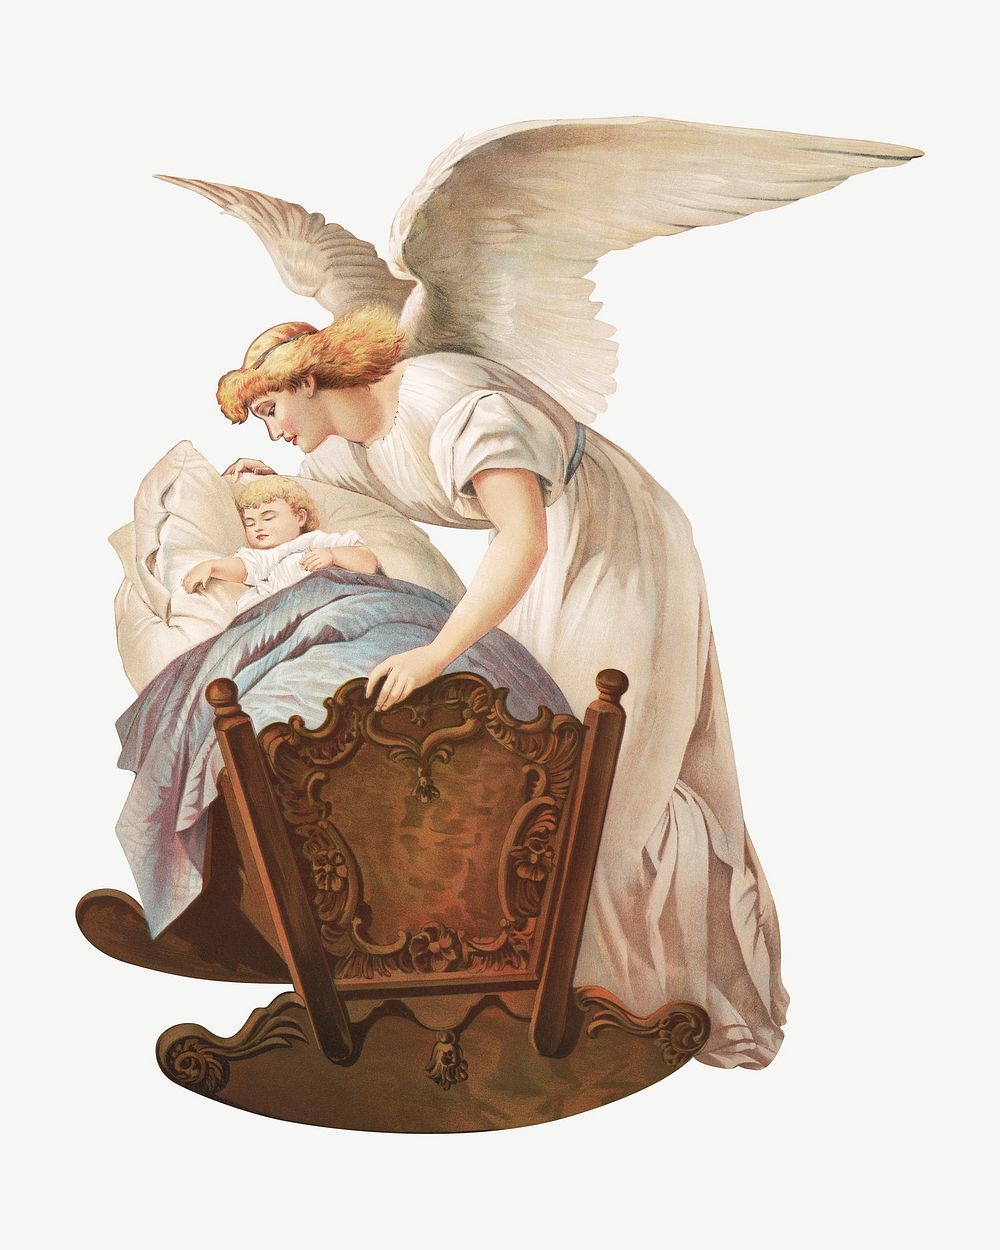 The angel's whisper, vintage illustration psd. Remixed by rawpixel.